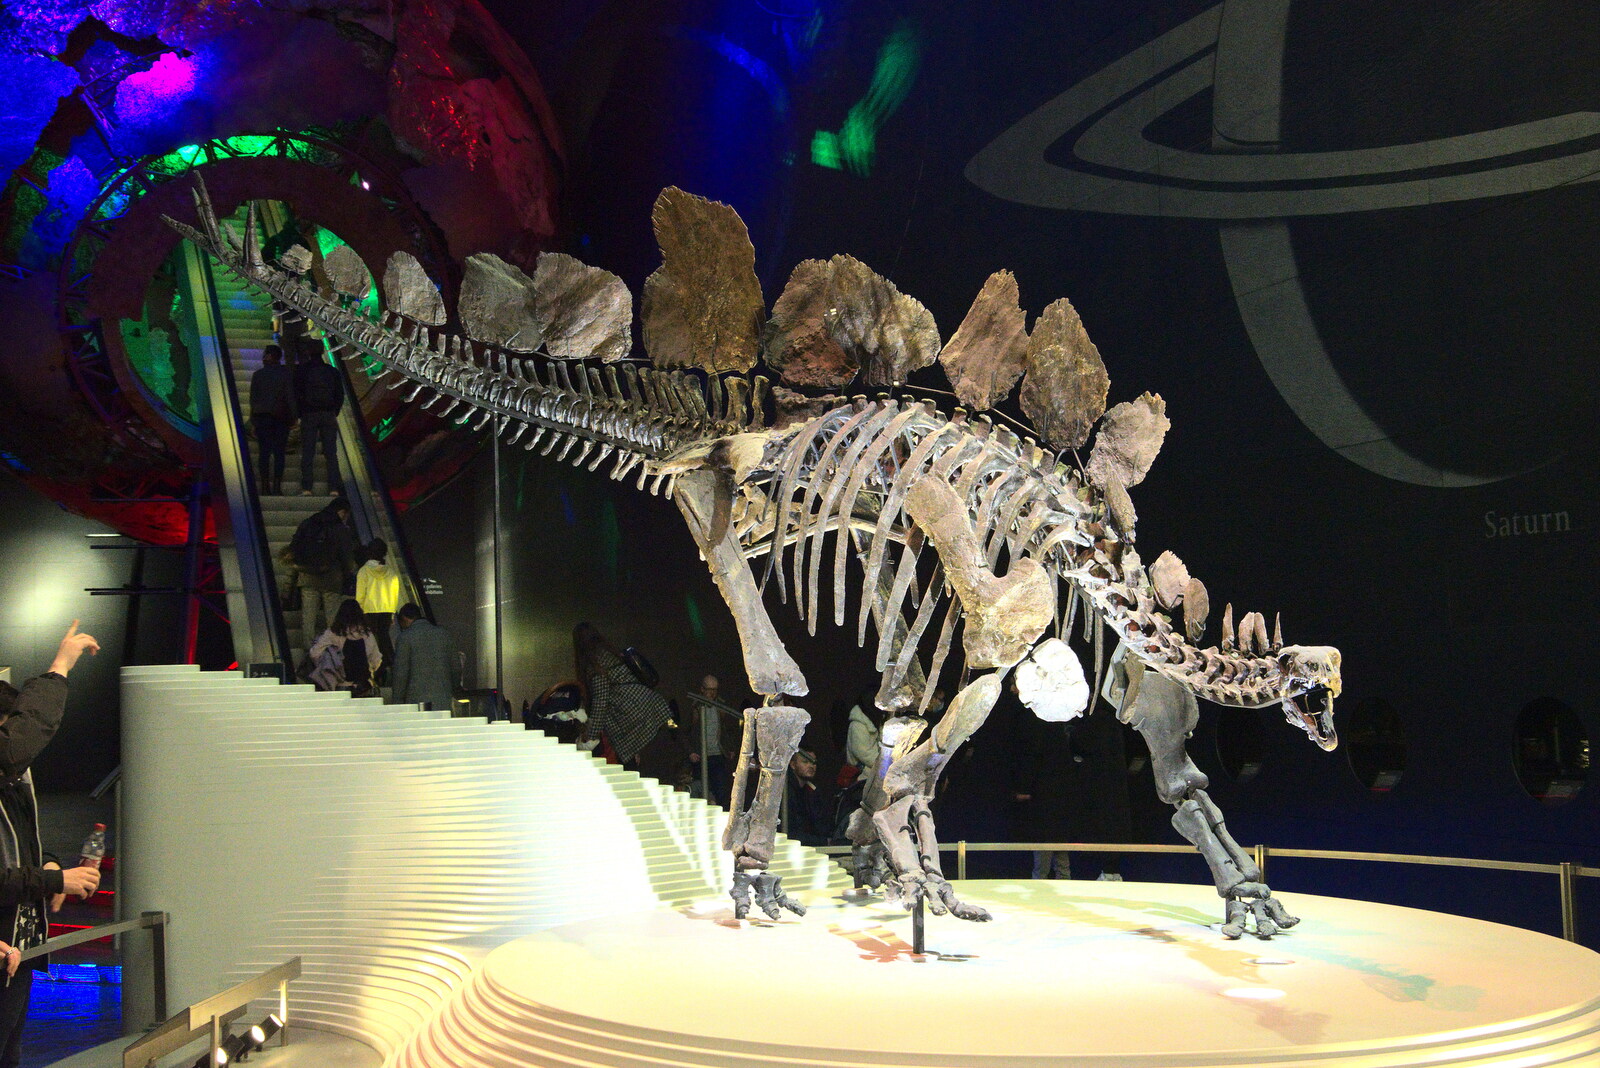 A stegosaurus skeleton from A Trip to the Natural History Museum, Kensington, London - 15th January 2022